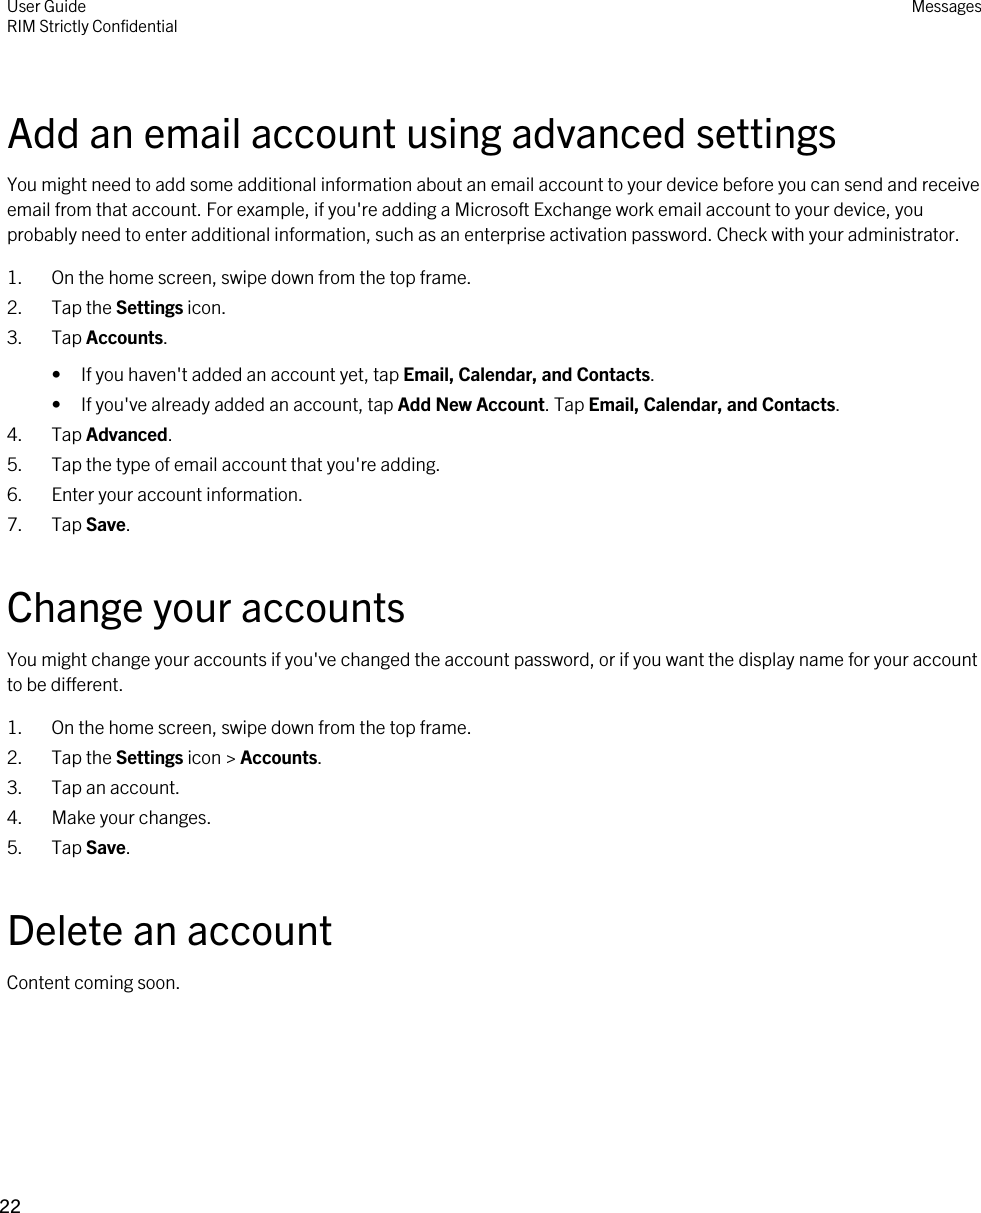 Add an email account using advanced settingsYou might need to add some additional information about an email account to your device before you can send and receive email from that account. For example, if you&apos;re adding a Microsoft Exchange work email account to your device, you probably need to enter additional information, such as an enterprise activation password. Check with your administrator.1. On the home screen, swipe down from the top frame.2. Tap the Settings icon.3. Tap Accounts.• If you haven&apos;t added an account yet, tap Email, Calendar, and Contacts.• If you&apos;ve already added an account, tap Add New Account. Tap Email, Calendar, and Contacts.4. Tap Advanced.5. Tap the type of email account that you&apos;re adding.6. Enter your account information.7. Tap Save.Change your accountsYou might change your accounts if you&apos;ve changed the account password, or if you want the display name for your account to be different.1. On the home screen, swipe down from the top frame.2. Tap the Settings icon &gt; Accounts.3. Tap an account.4. Make your changes.5. Tap Save.Delete an accountContent coming soon.User GuideRIM Strictly ConfidentialMessages22 